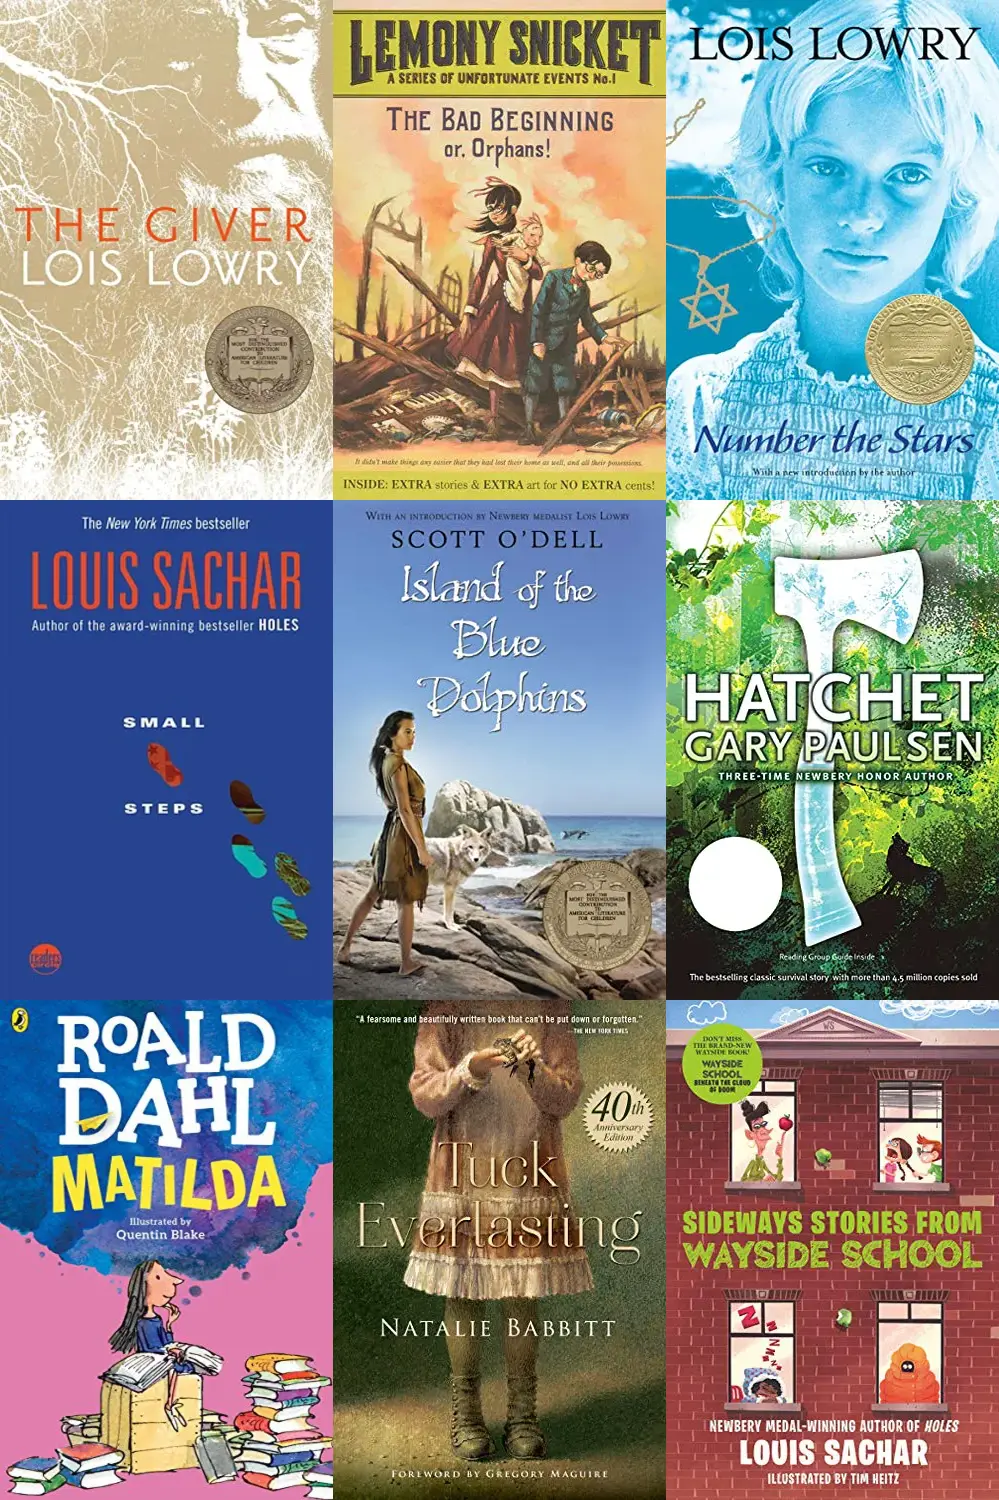 13 Books Like Holes by Louis Sachar to Read Next